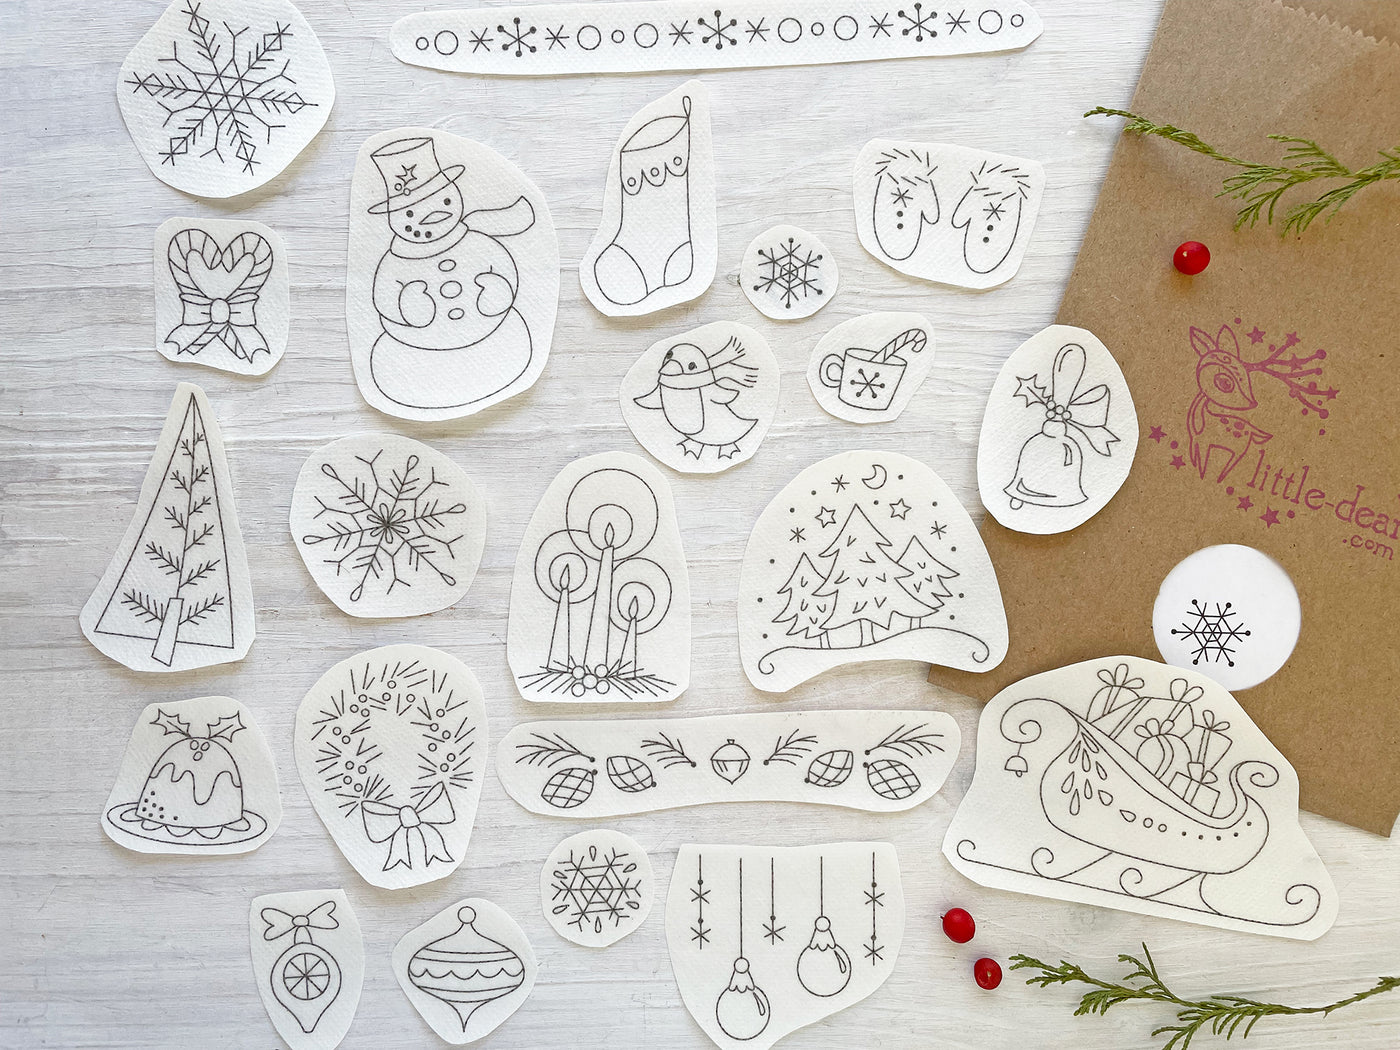 Christmas embroidery kit, Snowflake embroidery ornament kit, Kids  embroidery, Christmas craft kit, Christmas embroidery, at home craft kit —  I Heart Stitch Art: Beginner Embroidery Kits + Patterns